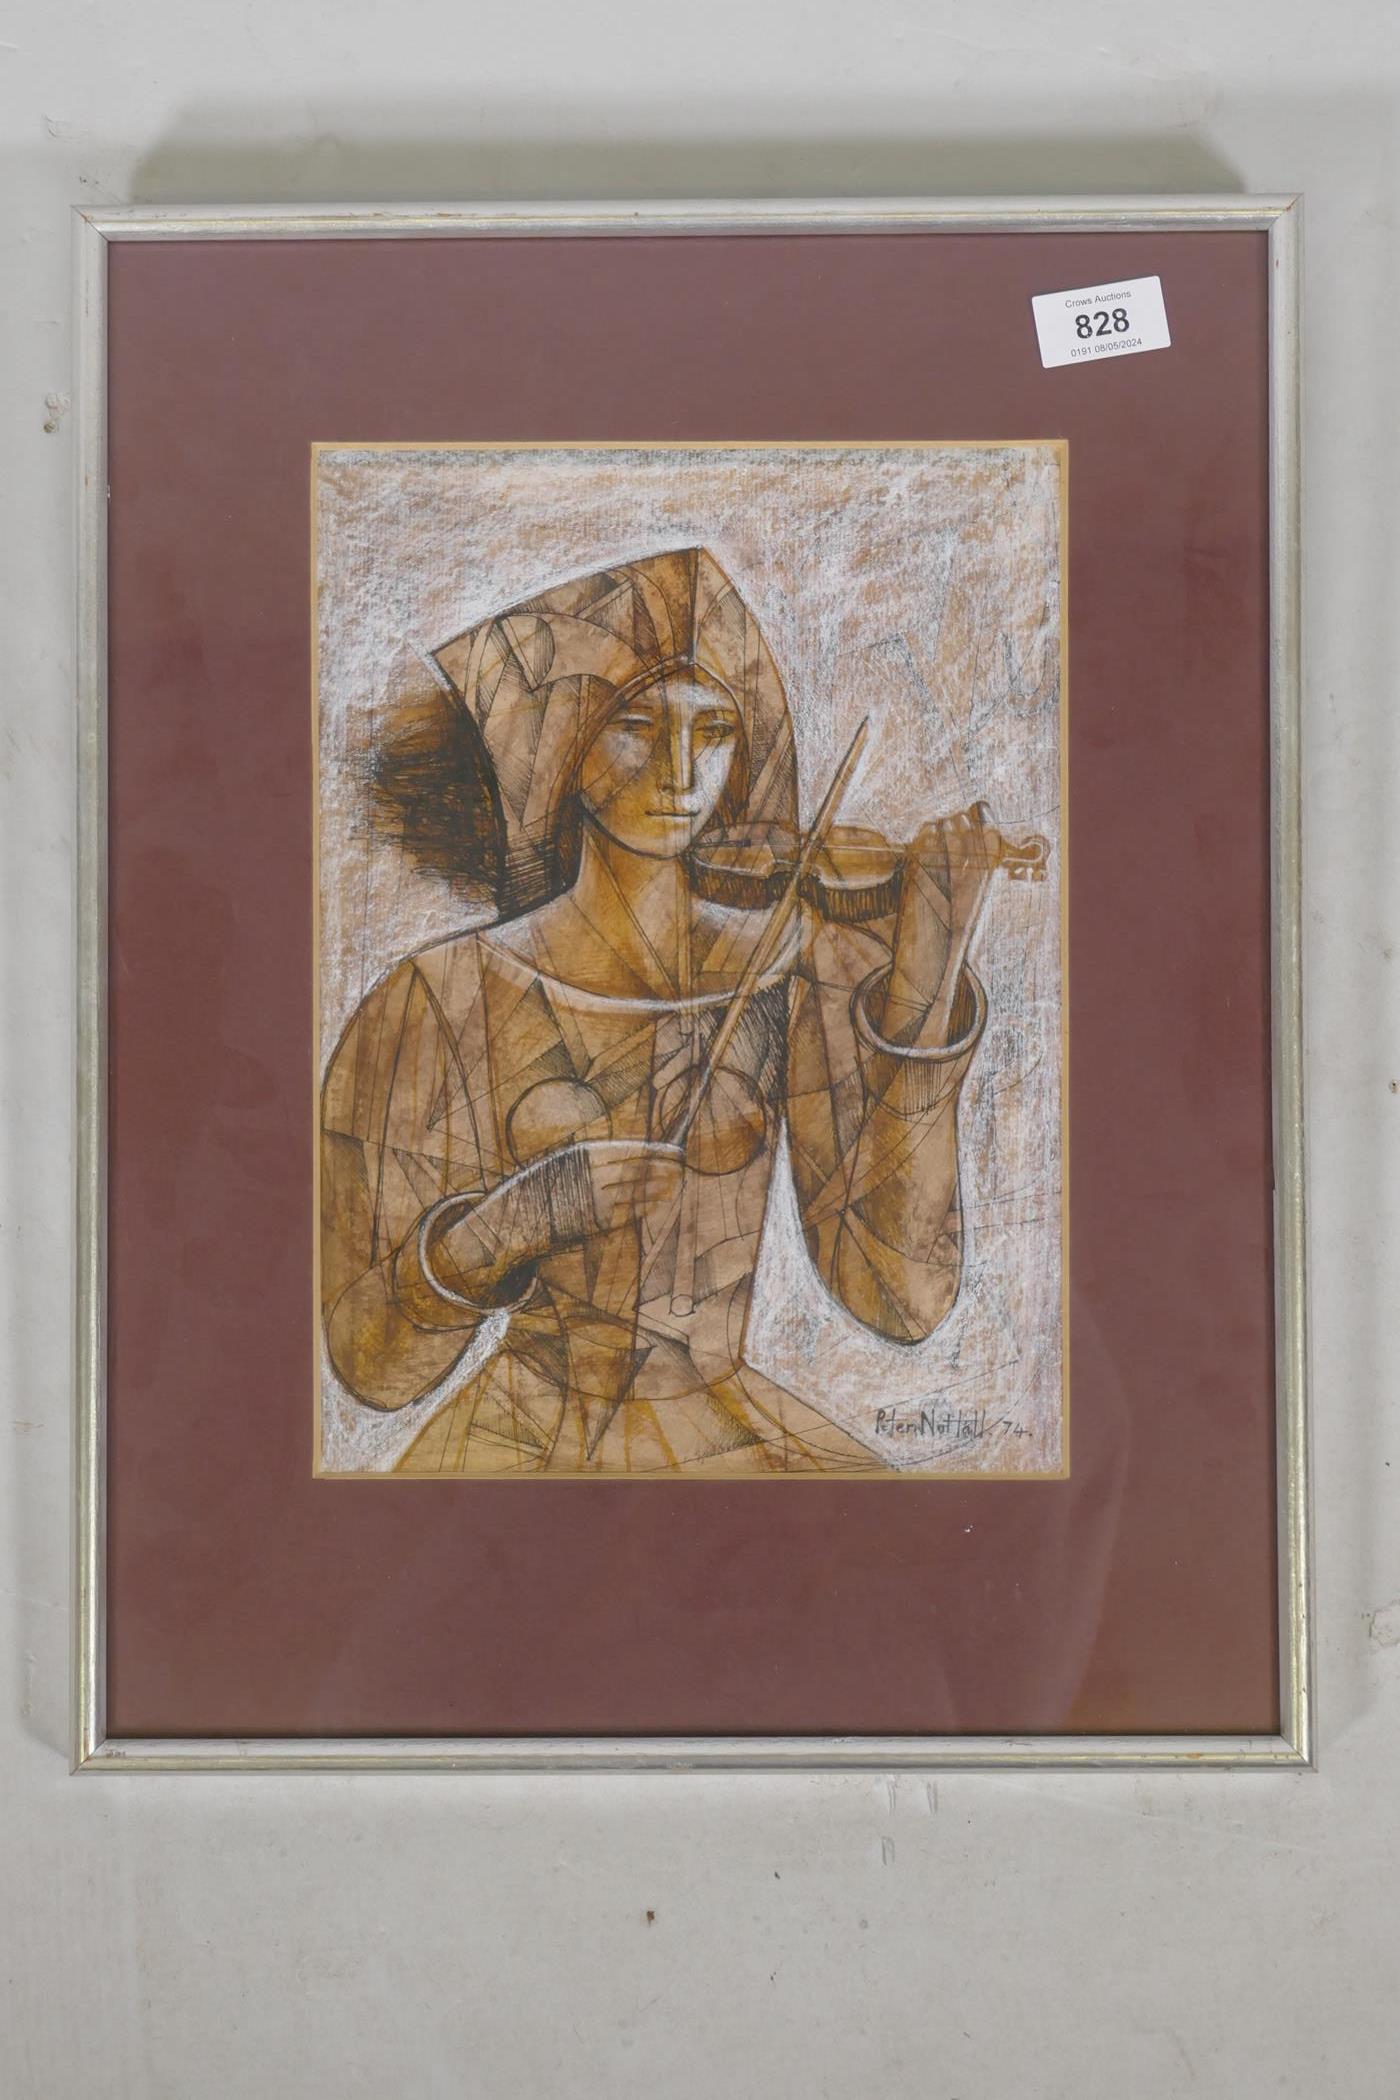 Peter Nuttall, woman playing a violin, signeda nd dated '74, pen, wash and crayon, 22 x 30cm - Image 2 of 3